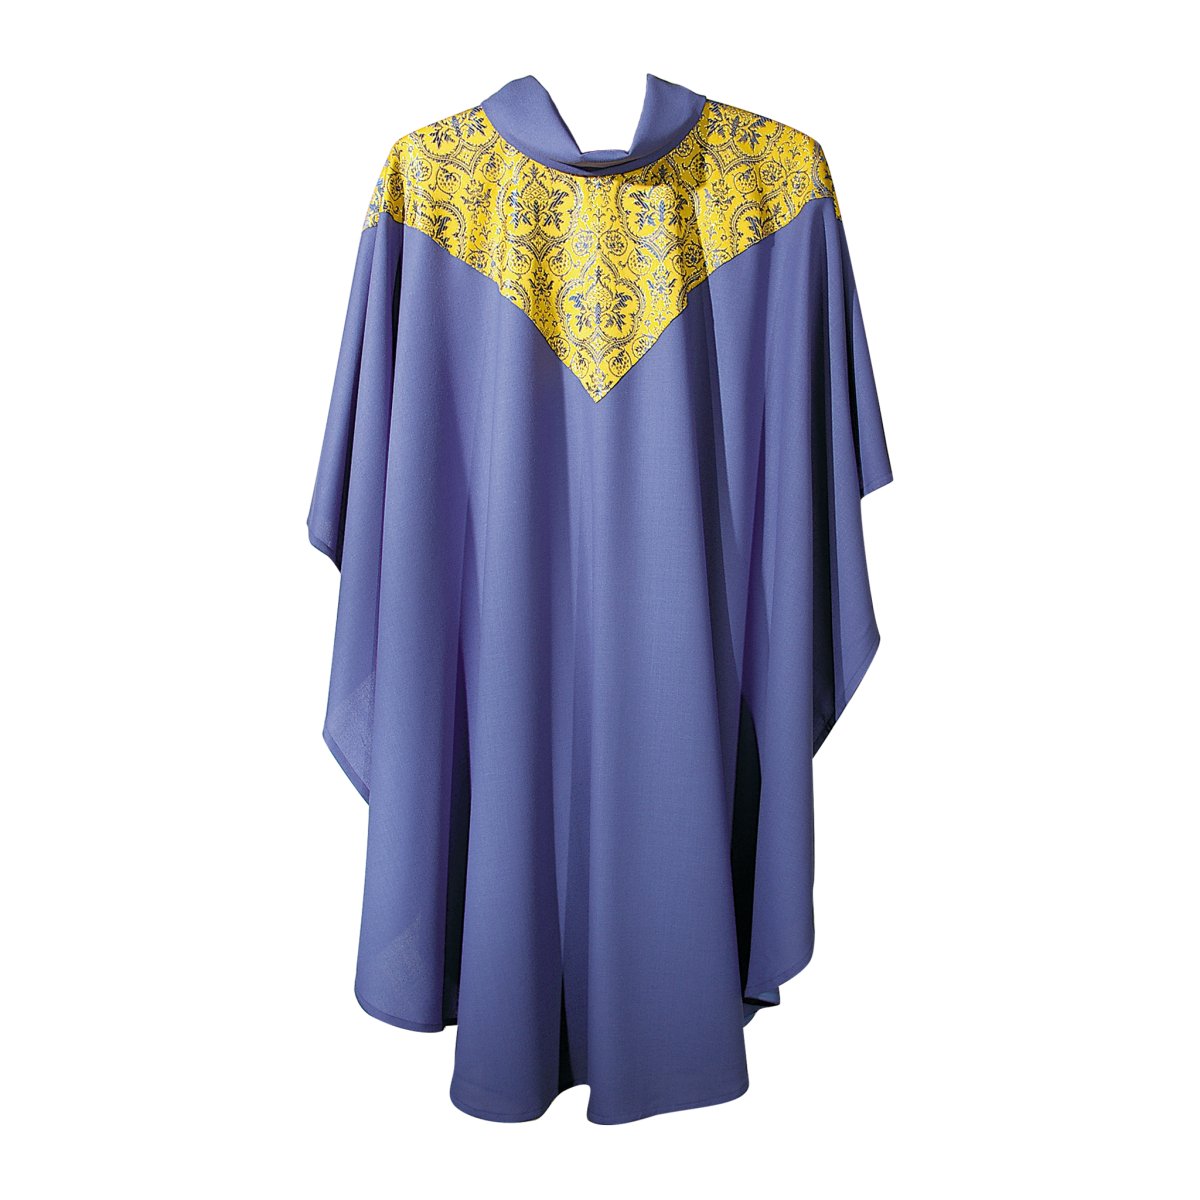 Wool Crepe V Panel Chasuble - Hayes & Finch